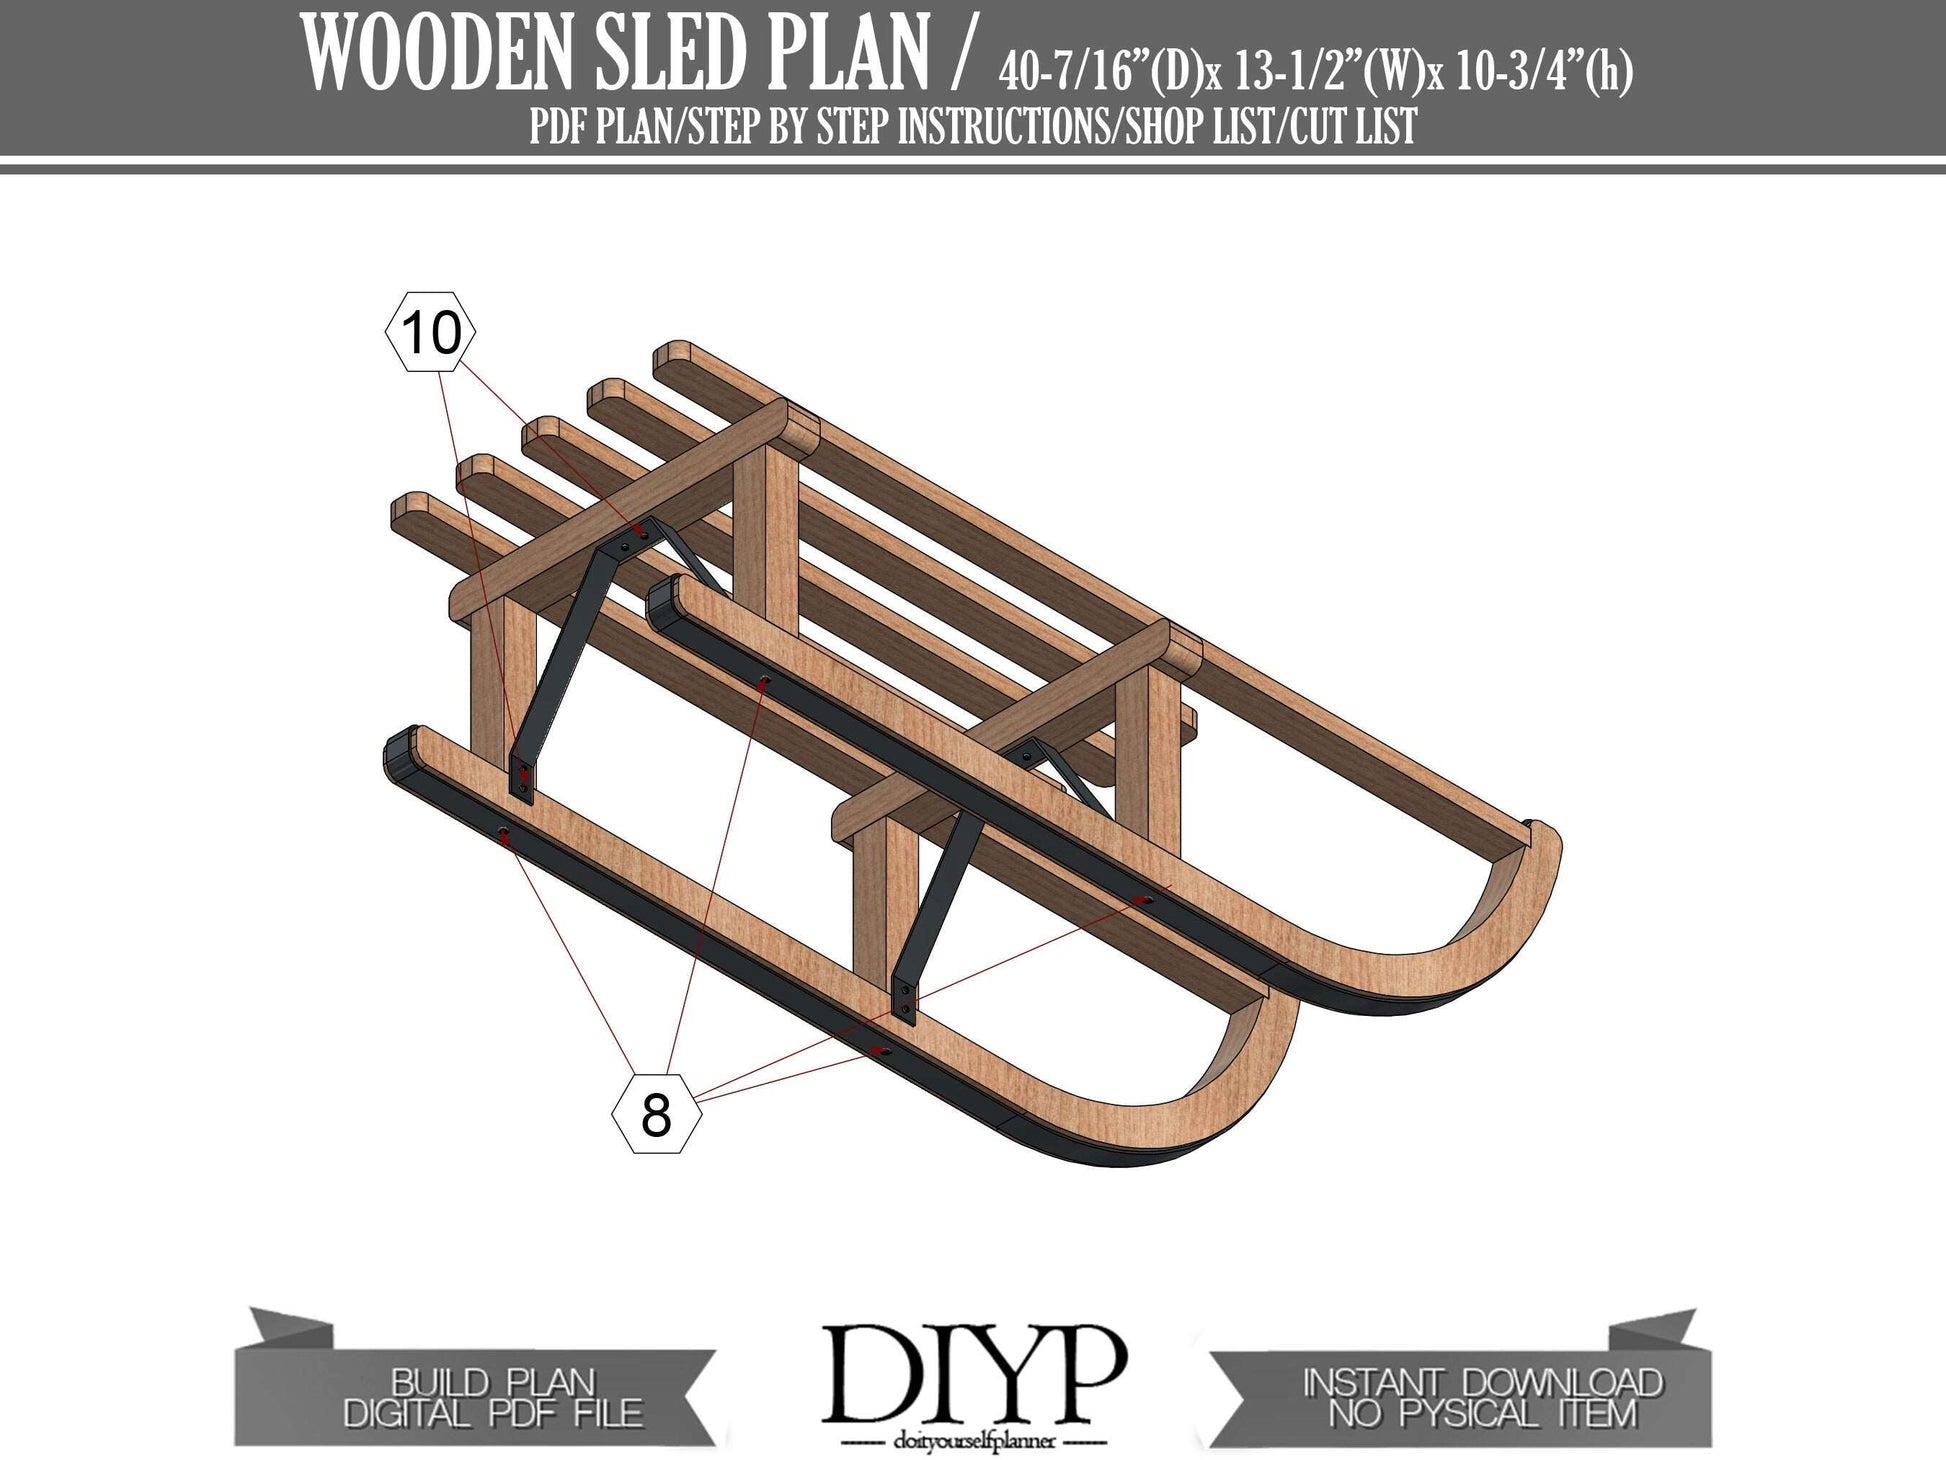 Build plans for DIY wooden sled plan, easy woodworking plans for sleigh